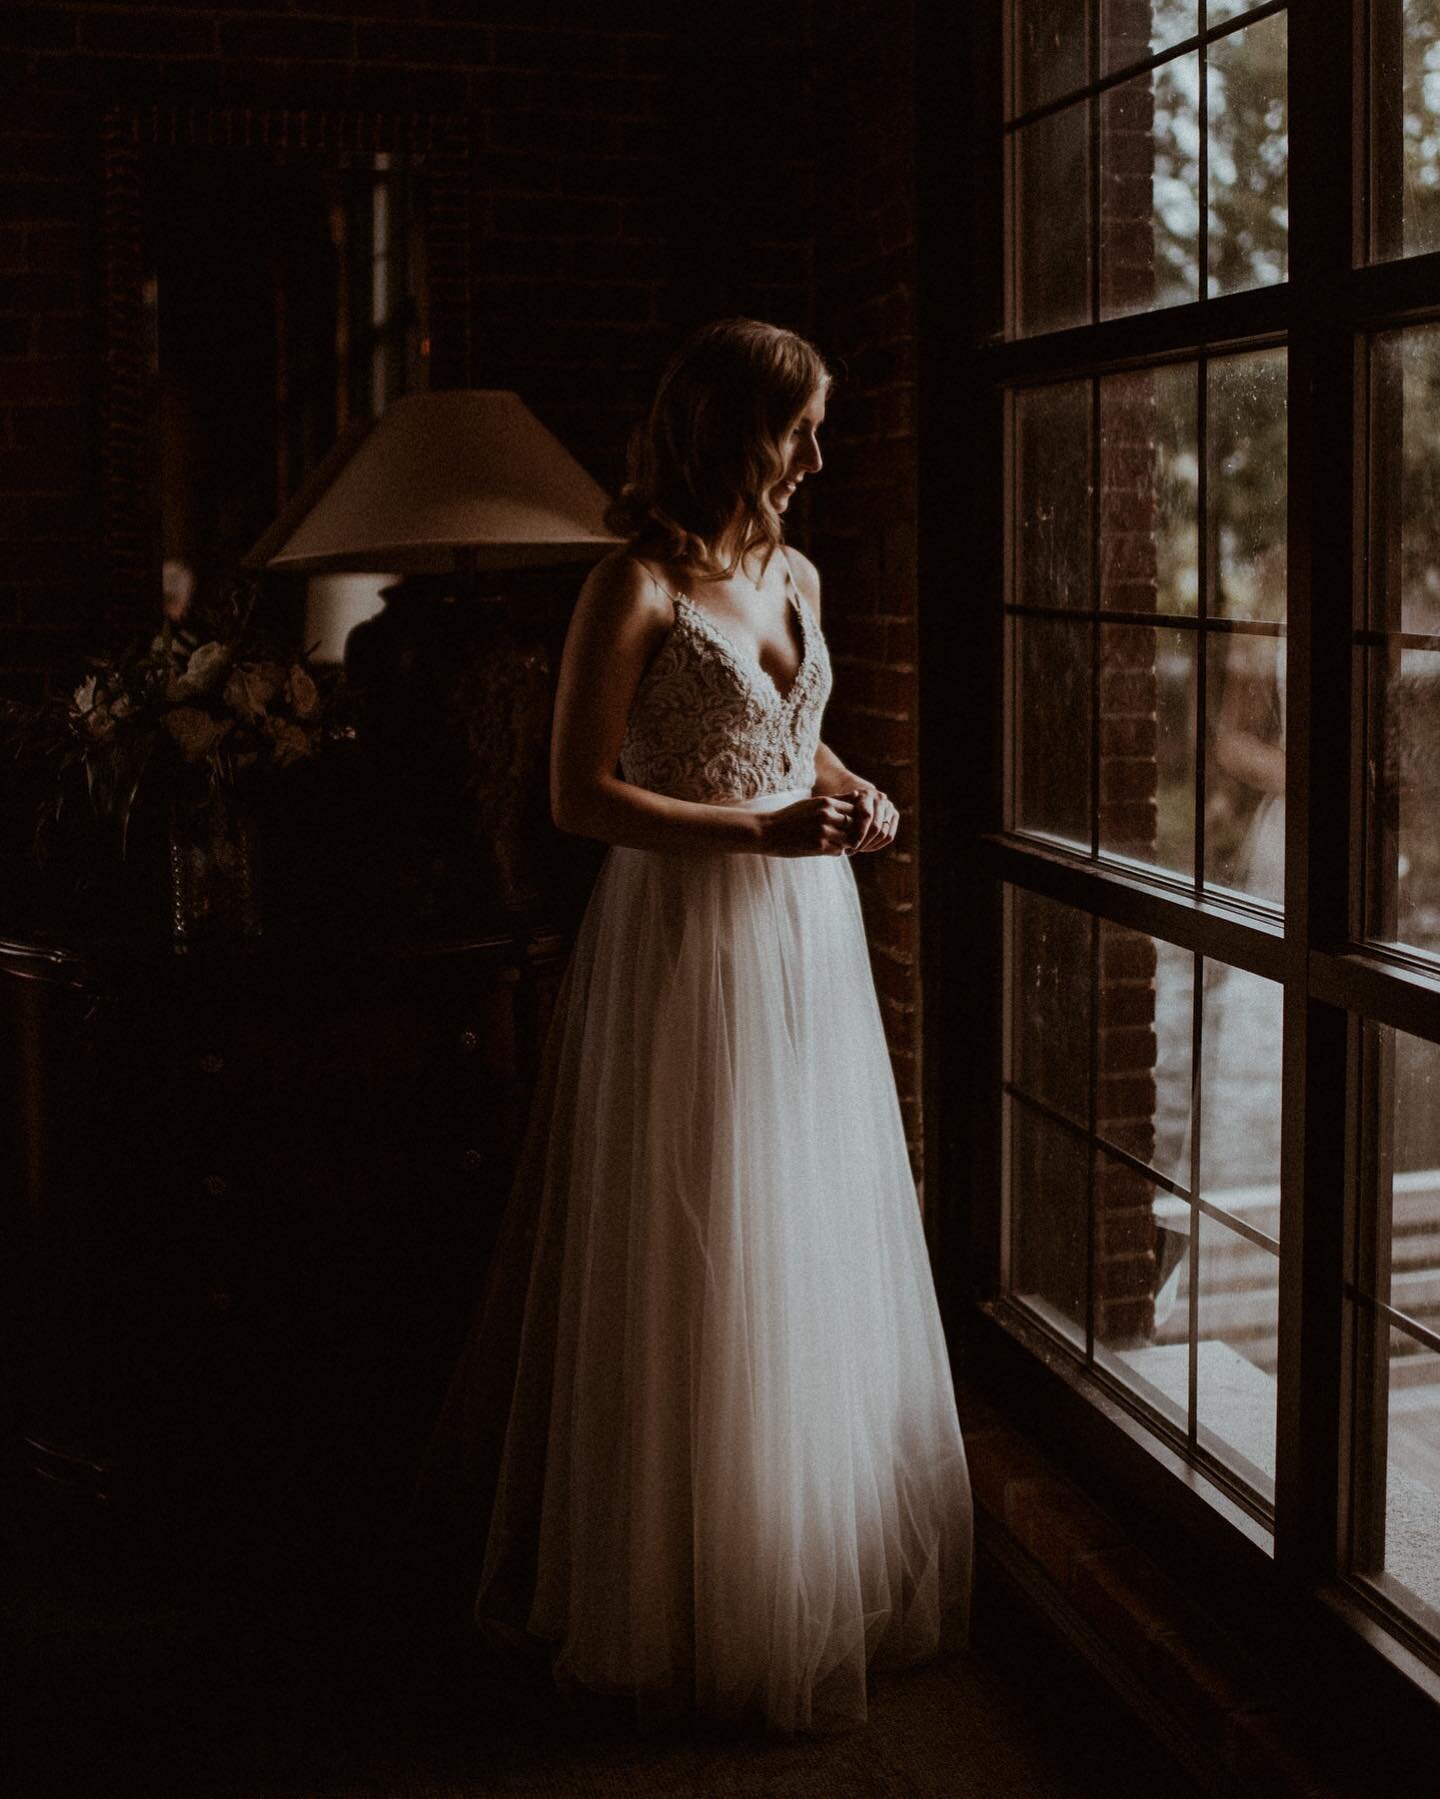 some photos live rent free in my mind and once in awhile i think about them 🖤🥲 this photo of carly as a bride, just before the ceremony at the charles river museum, is a forever favorite of mine. 

.
.
.
.
.
.
.

#vanessaalvesphotography
#wedding #